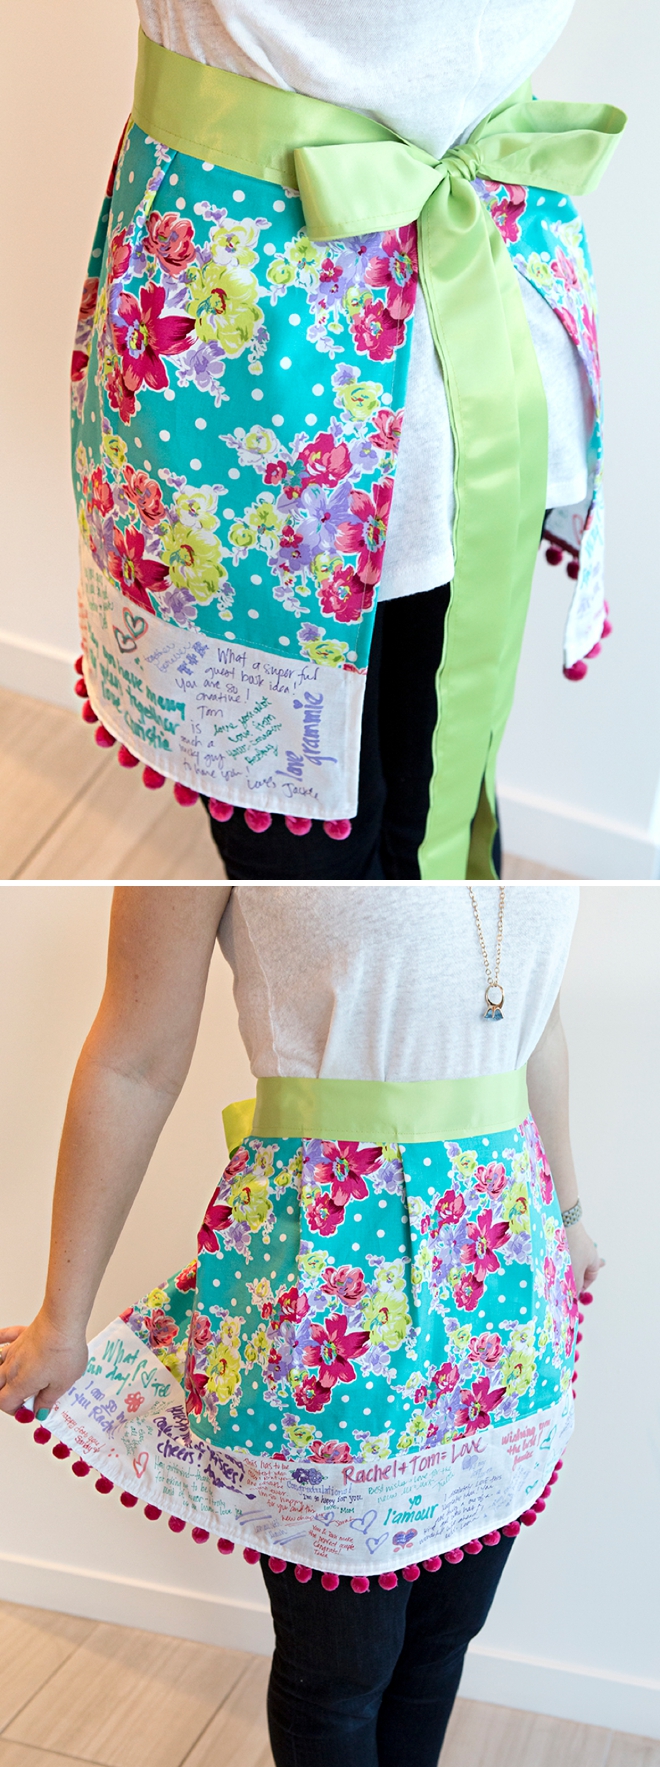 Learn how to sew this simple apron and then have your bridal shower guests sign it for the cutest guest book!